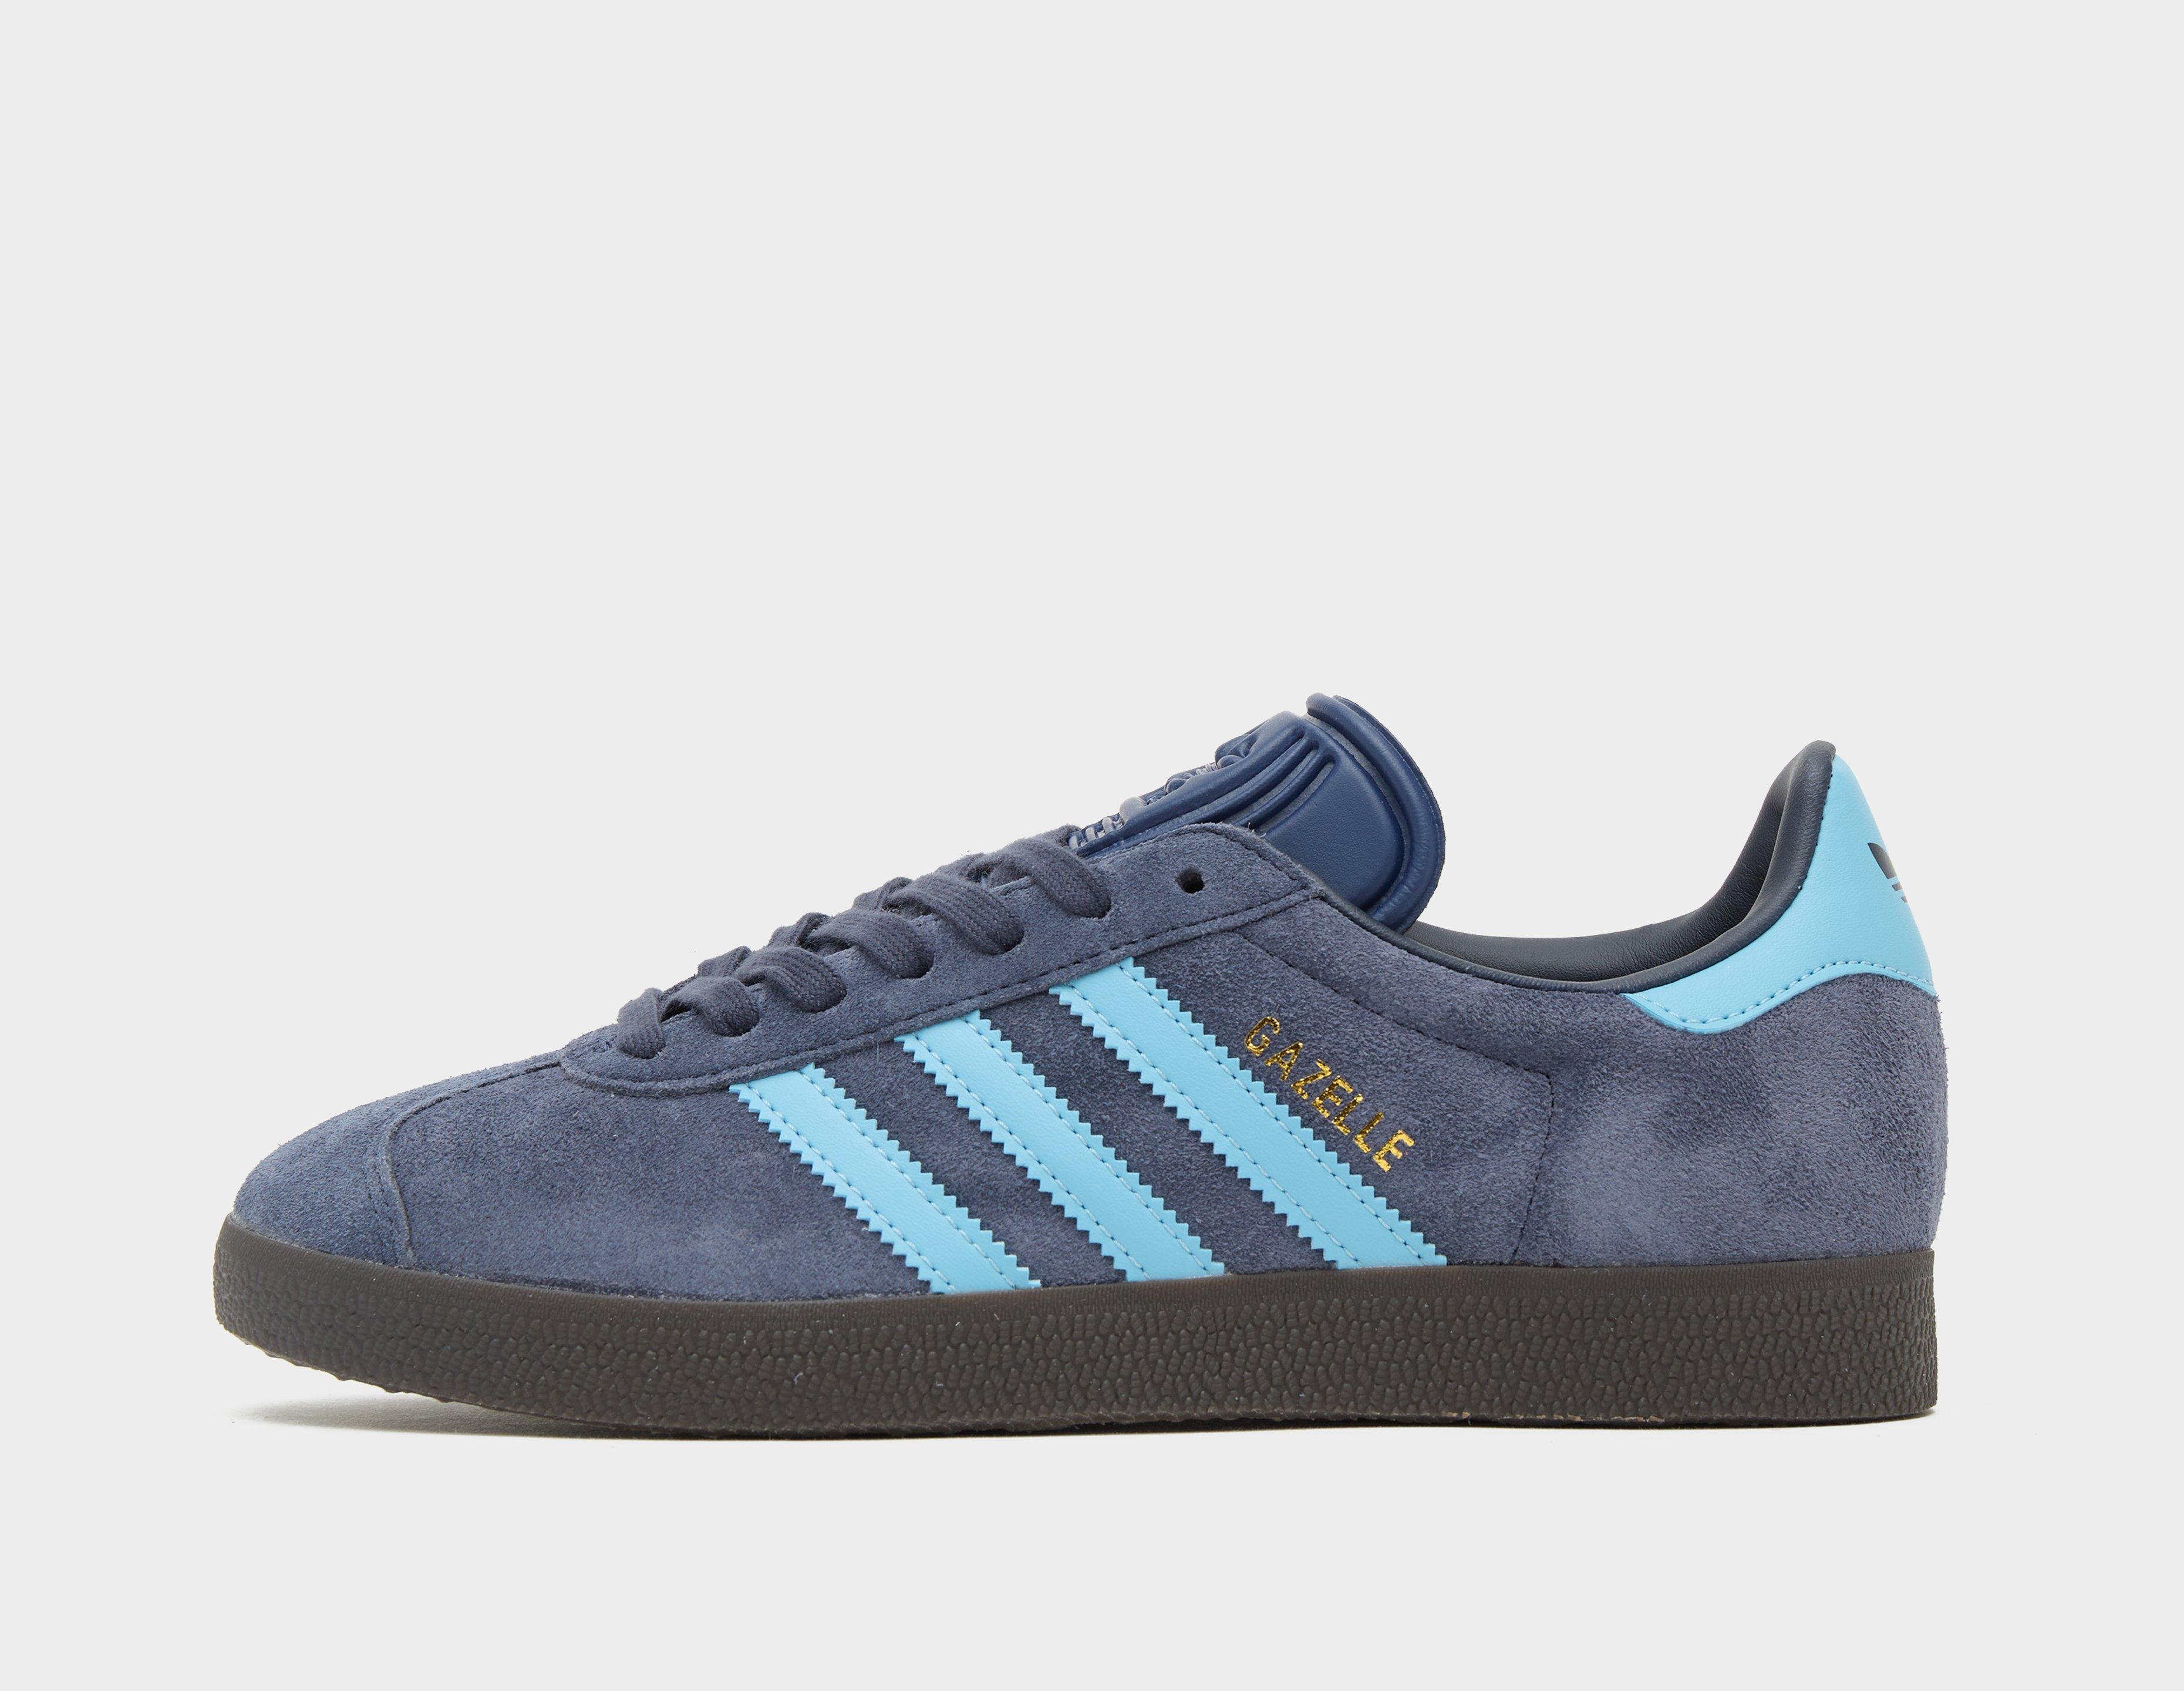 Adidas Originals Superstar Blue Suede Sneakers Mens Size 6 Gold Detail used